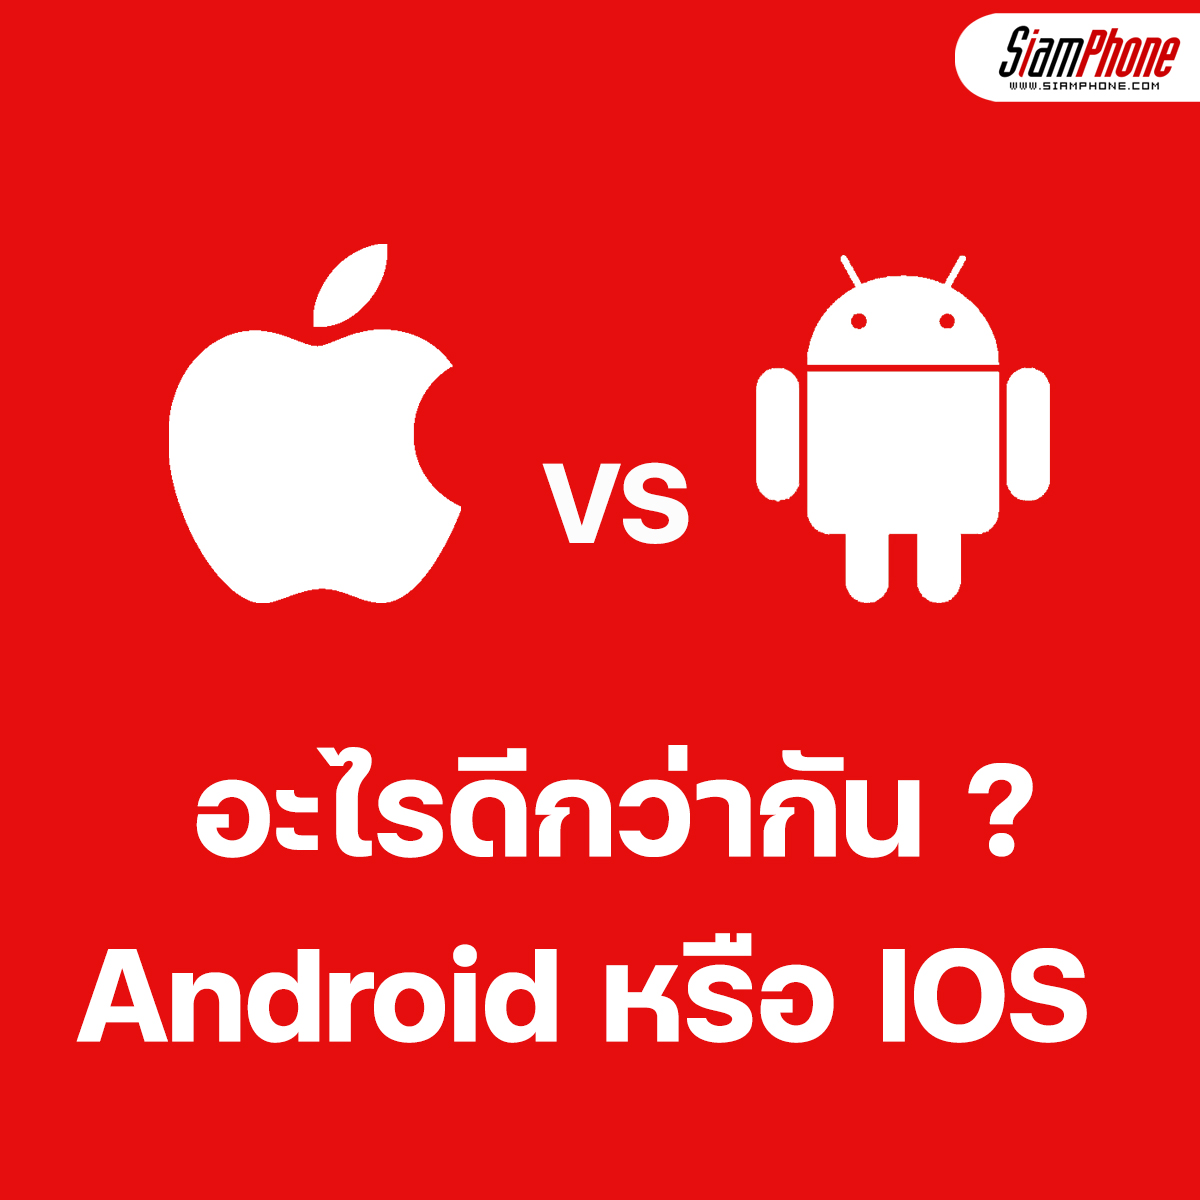 World problems are broken!  Between Android and iOS, which is better?